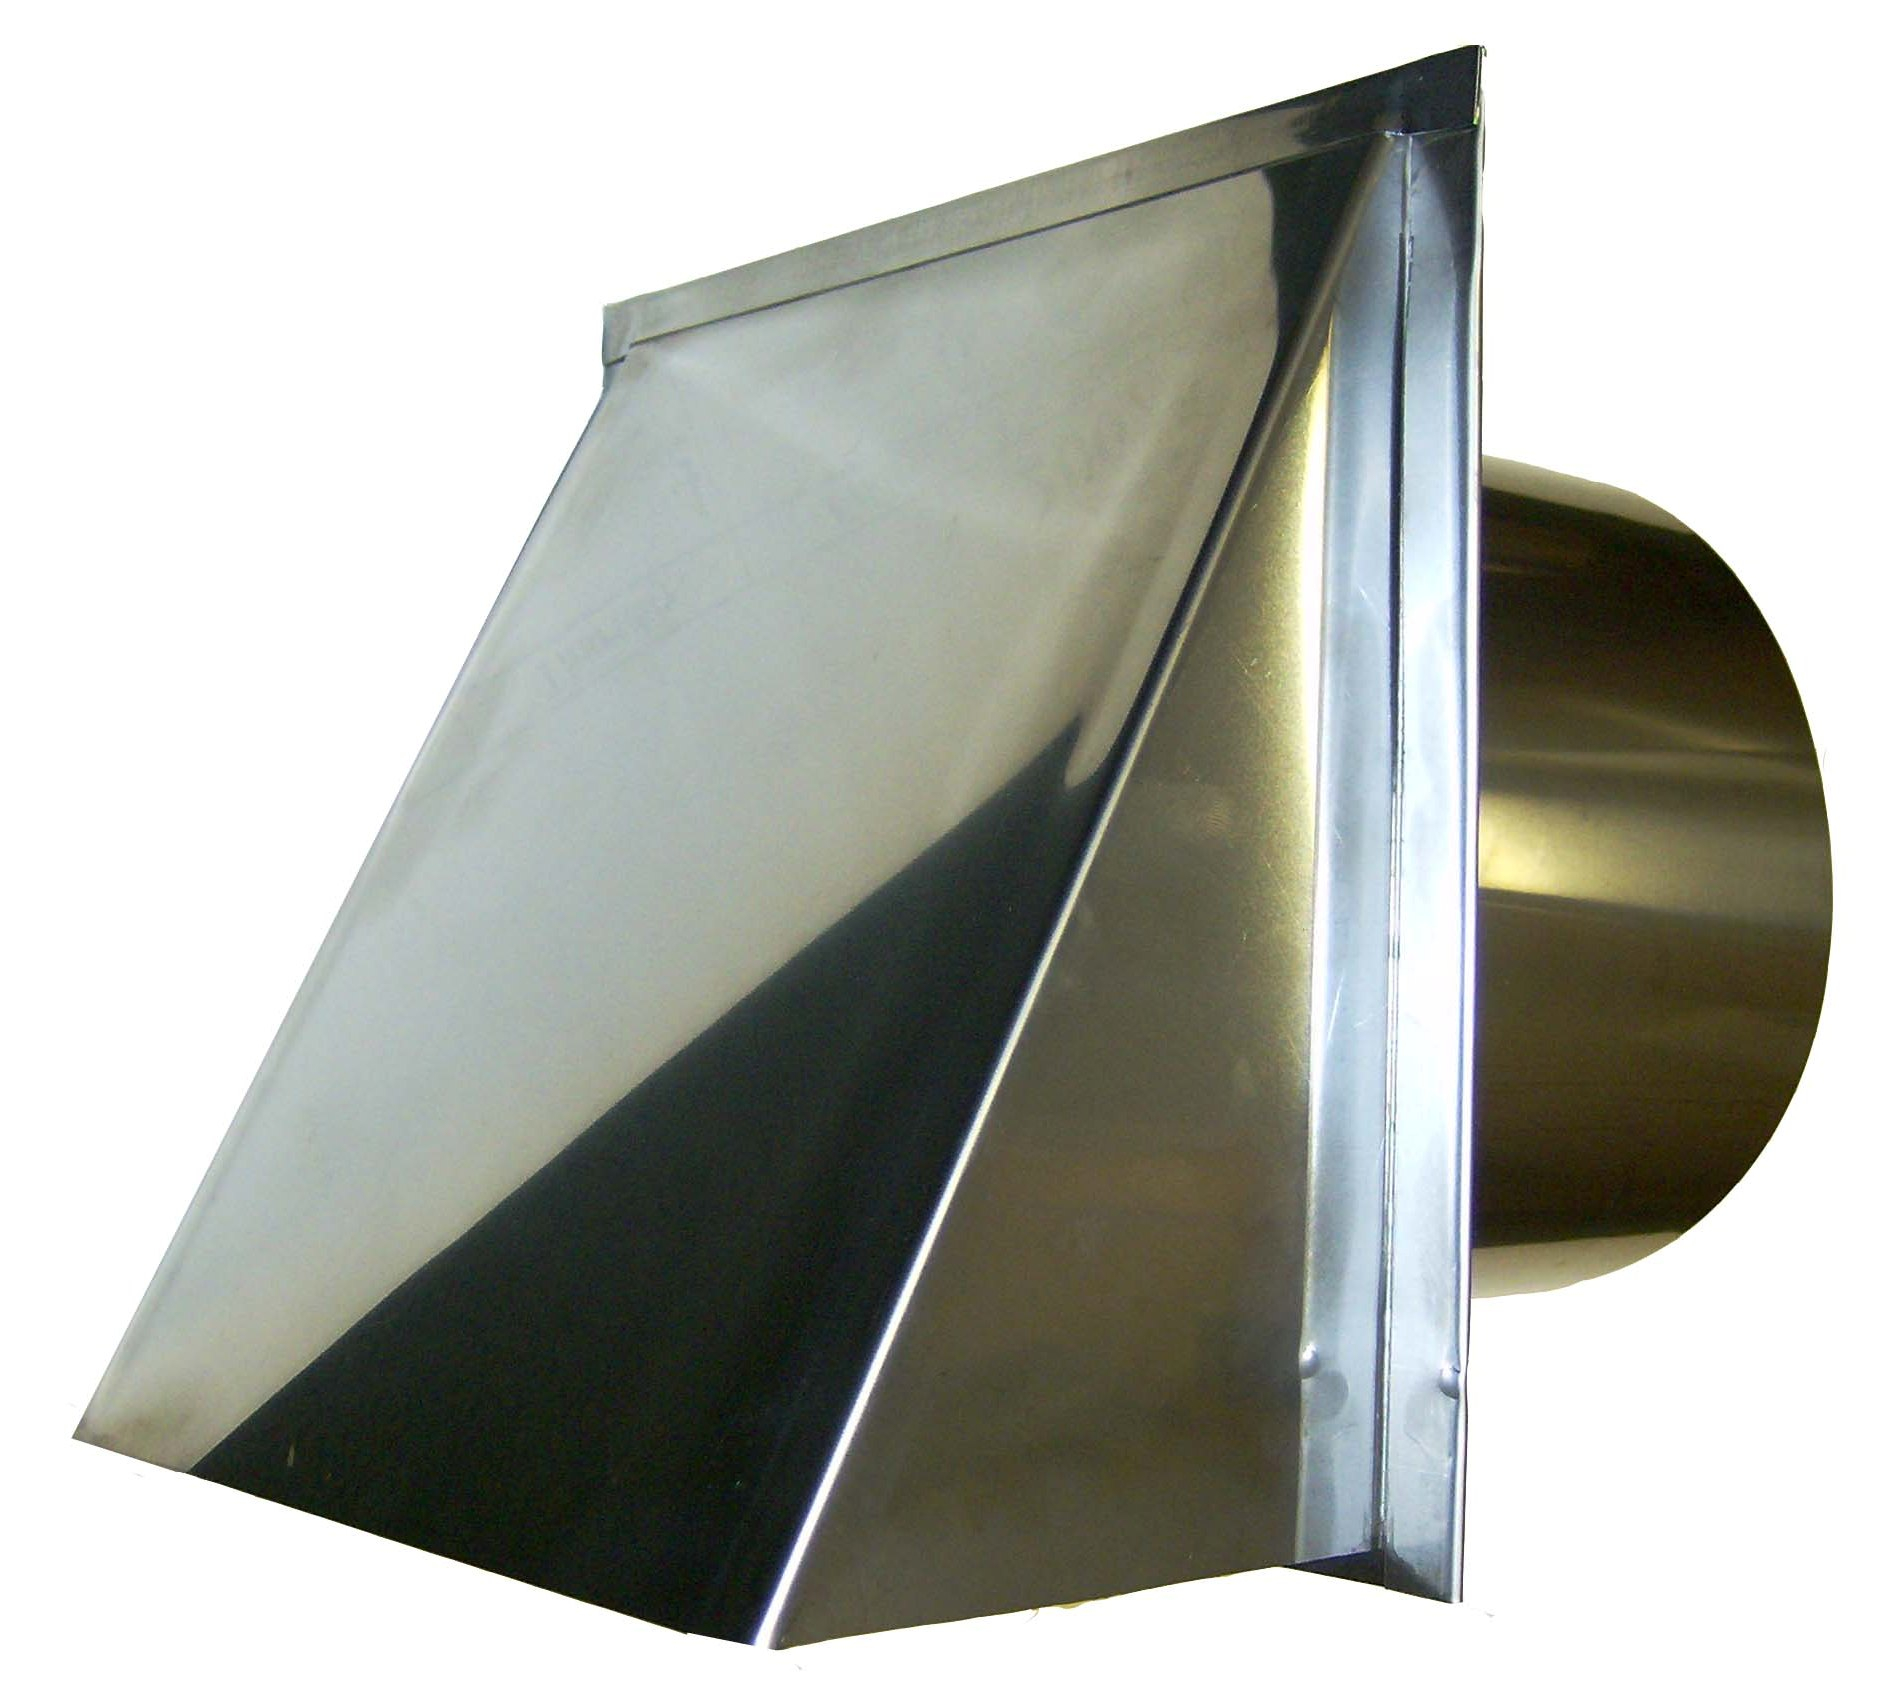 Range Exhaust Wall Vents And Roof Vents From Luxury Metals inside size 1879 X 1702